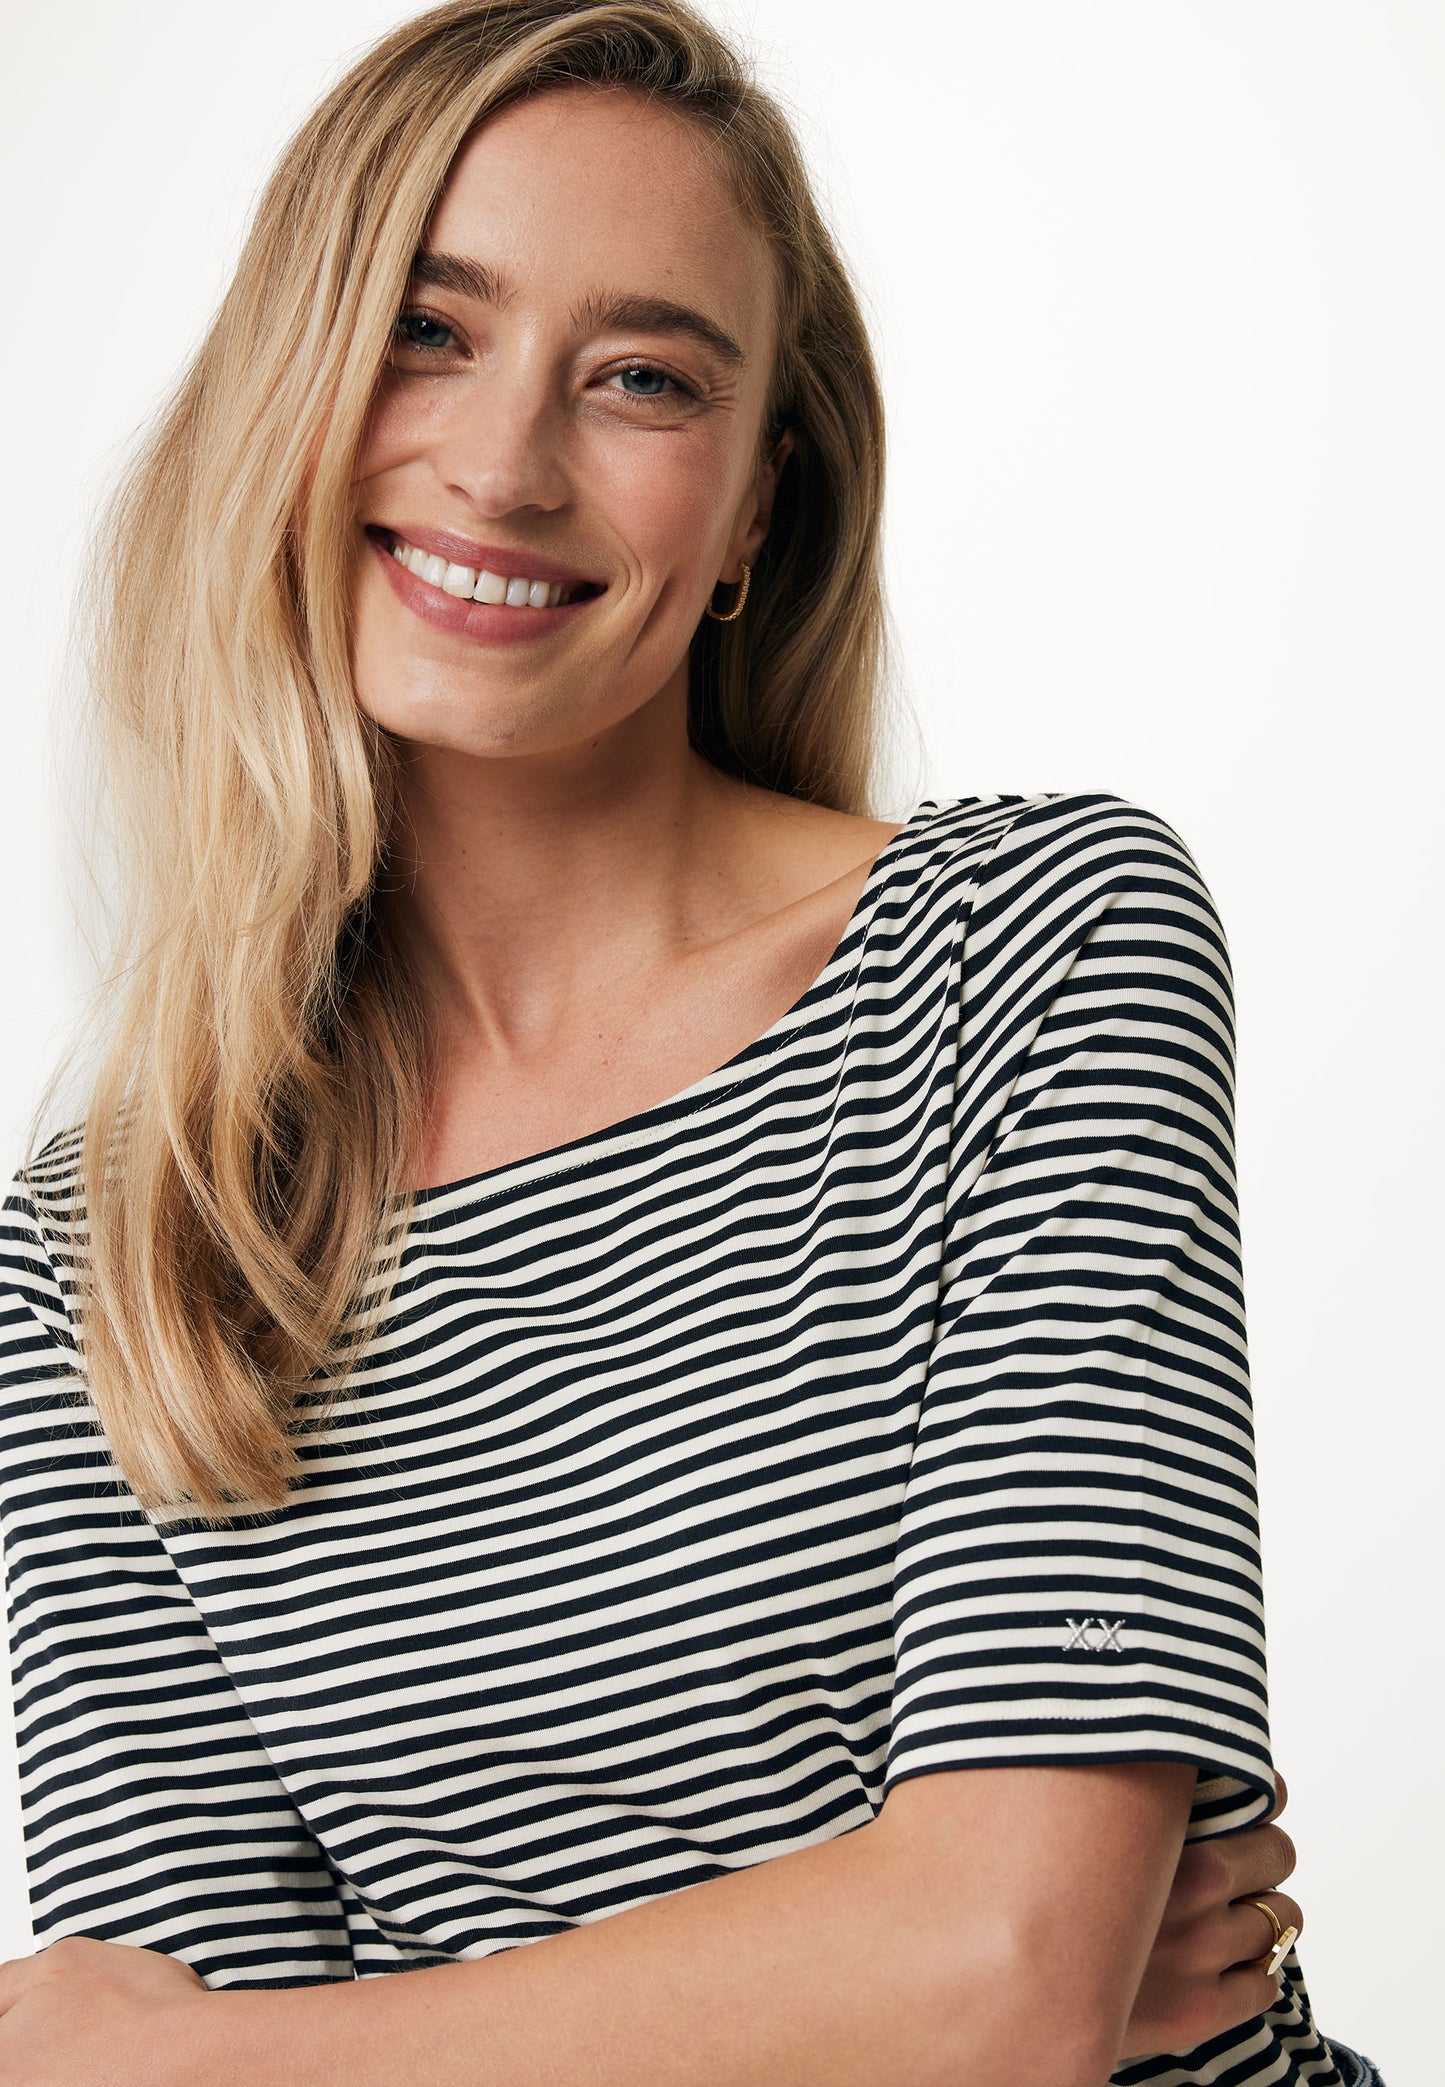 Striped T-Shirt with Neck Tee